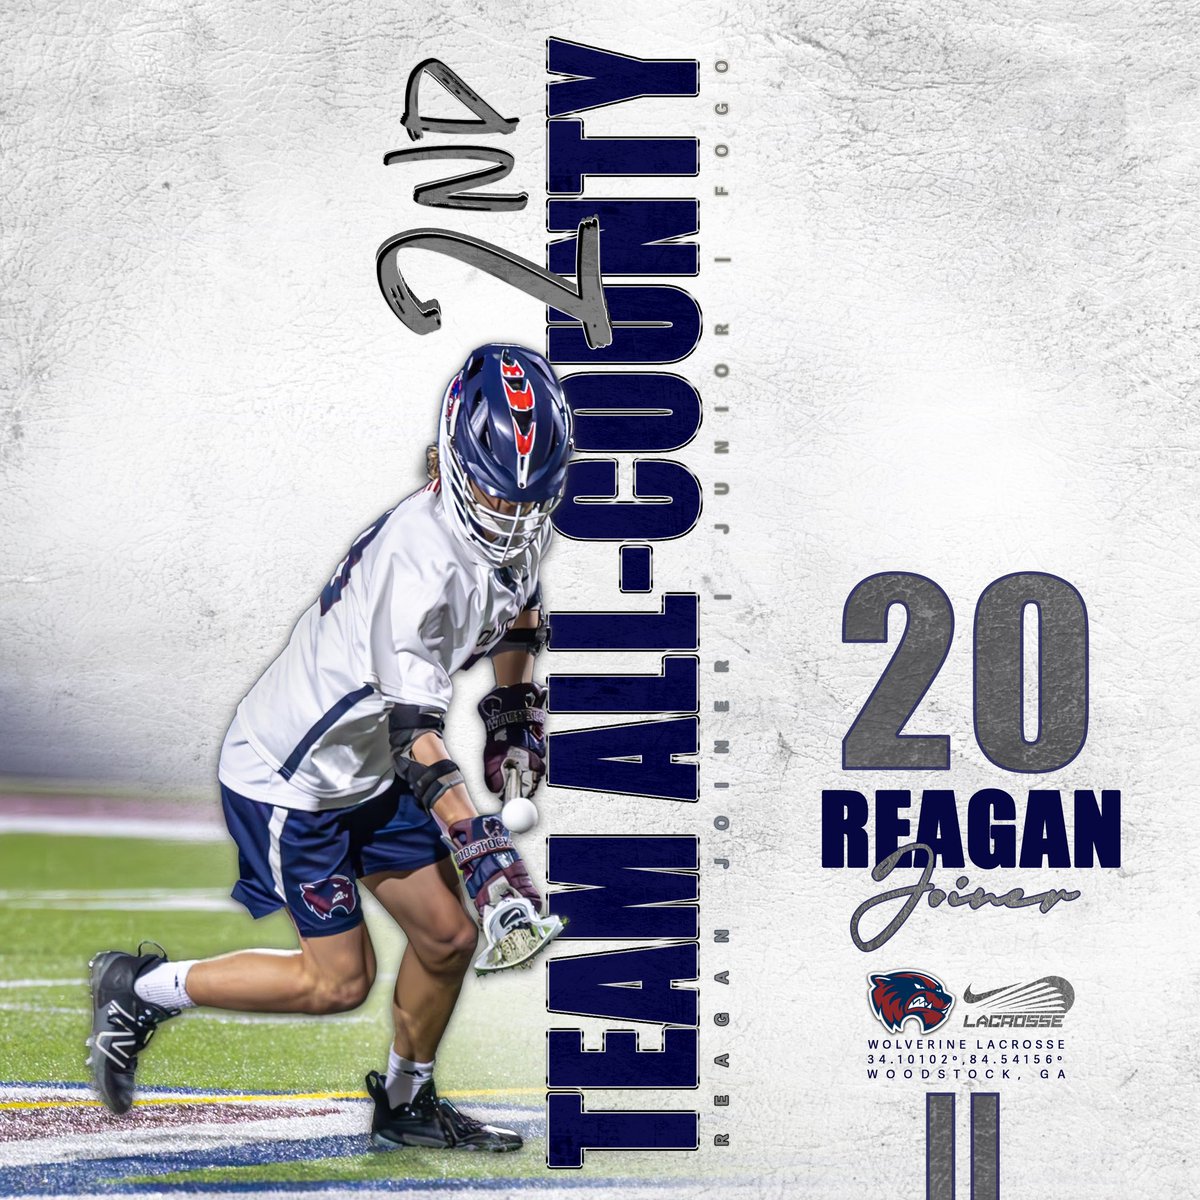 🥈𝗔𝗟𝗟-𝗖𝗢𝗨𝗡𝗧𝗬🥈 2nd Team All-County - Thank you all coaches across the county! Reagan Joiner led his team with pure grit. Very few players inspire a team by just their presence, Reagan does just that. His numbers are incredible. ⬇️ . 7️⃣2️⃣ - FO % 2️⃣6️⃣3️⃣ - FO Wins ‼️ . #lax